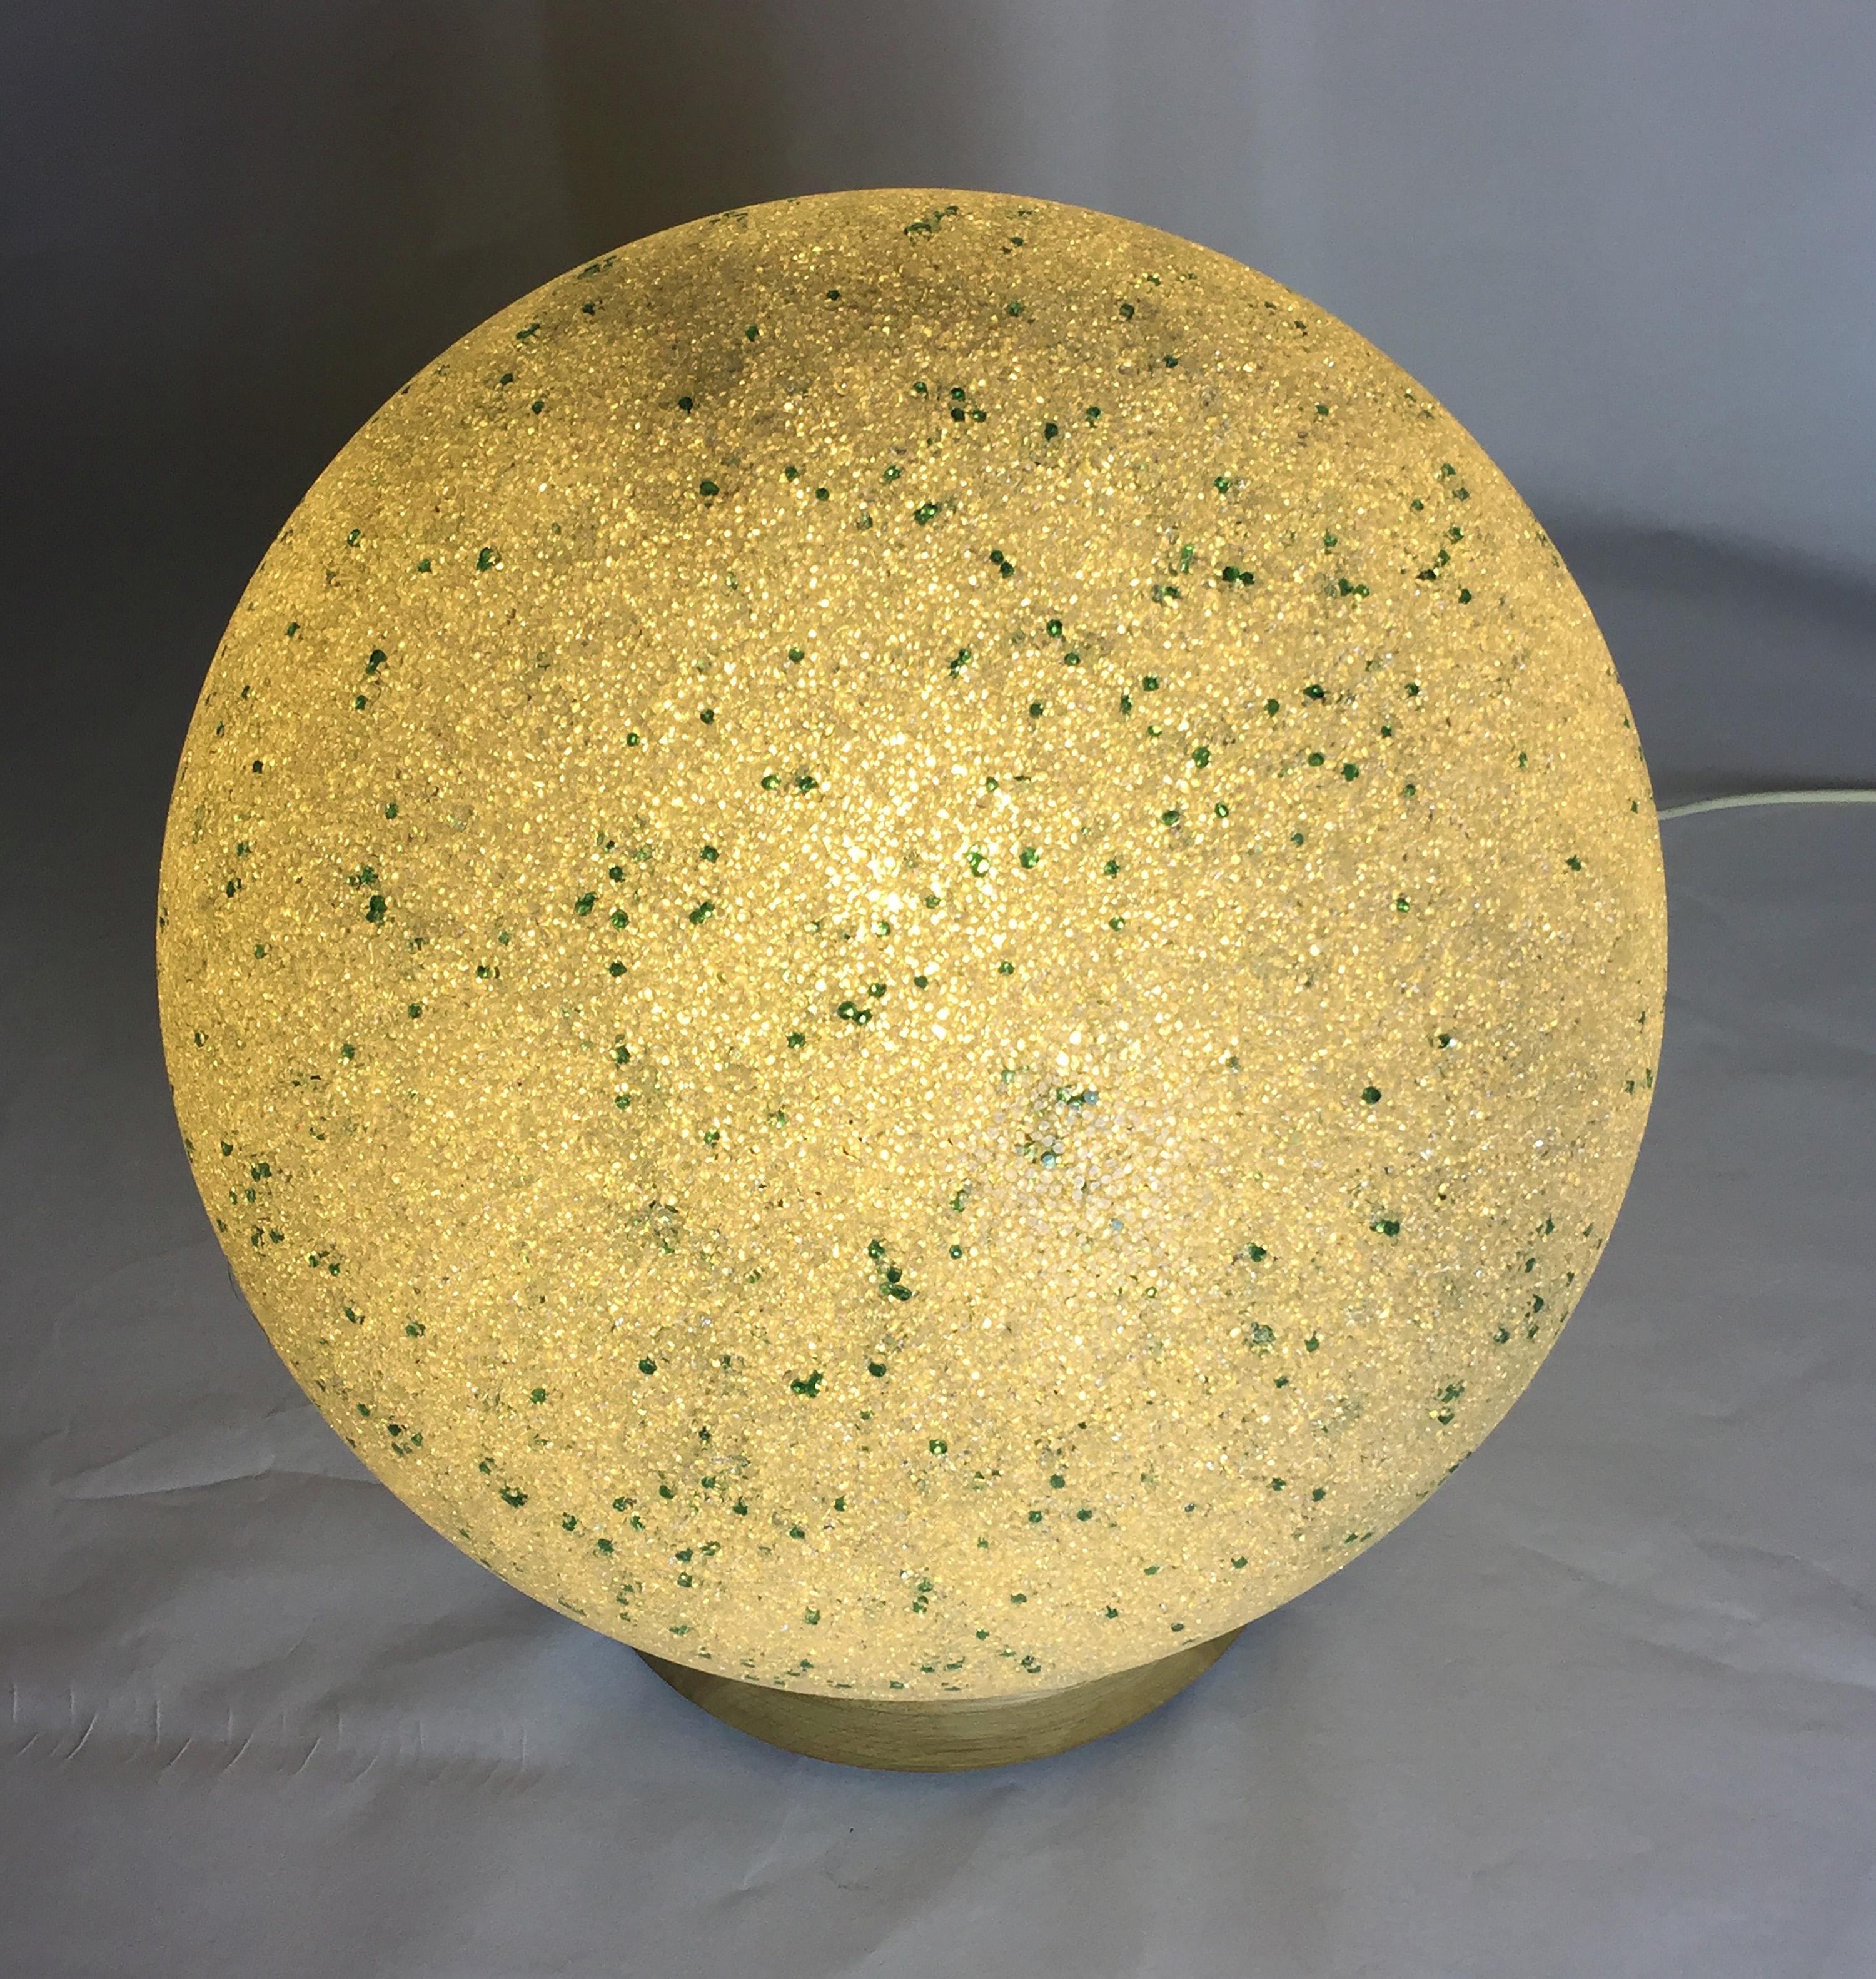 Delicate pâte de verre lamp with green inclusions. Made in Murano in 1960. Originally a pendant light, now mounted on a turned oak base with lamp holder.

The process of making Pate d'Verre is by pushing glass beads into a mould and then fusing